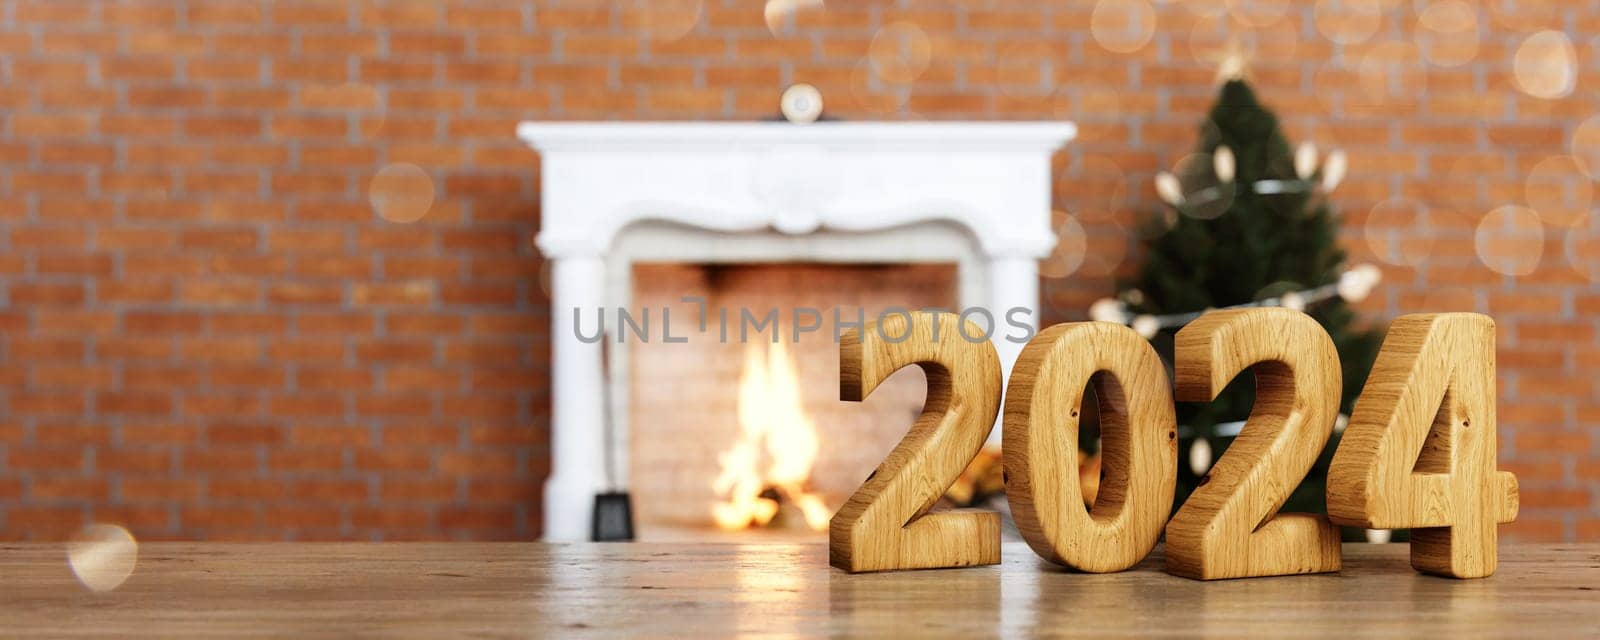 Merry christmas and happy new year. Christmas decoration living room. Festive cosy holiday background. 3D Rendering. 3D Illustration.